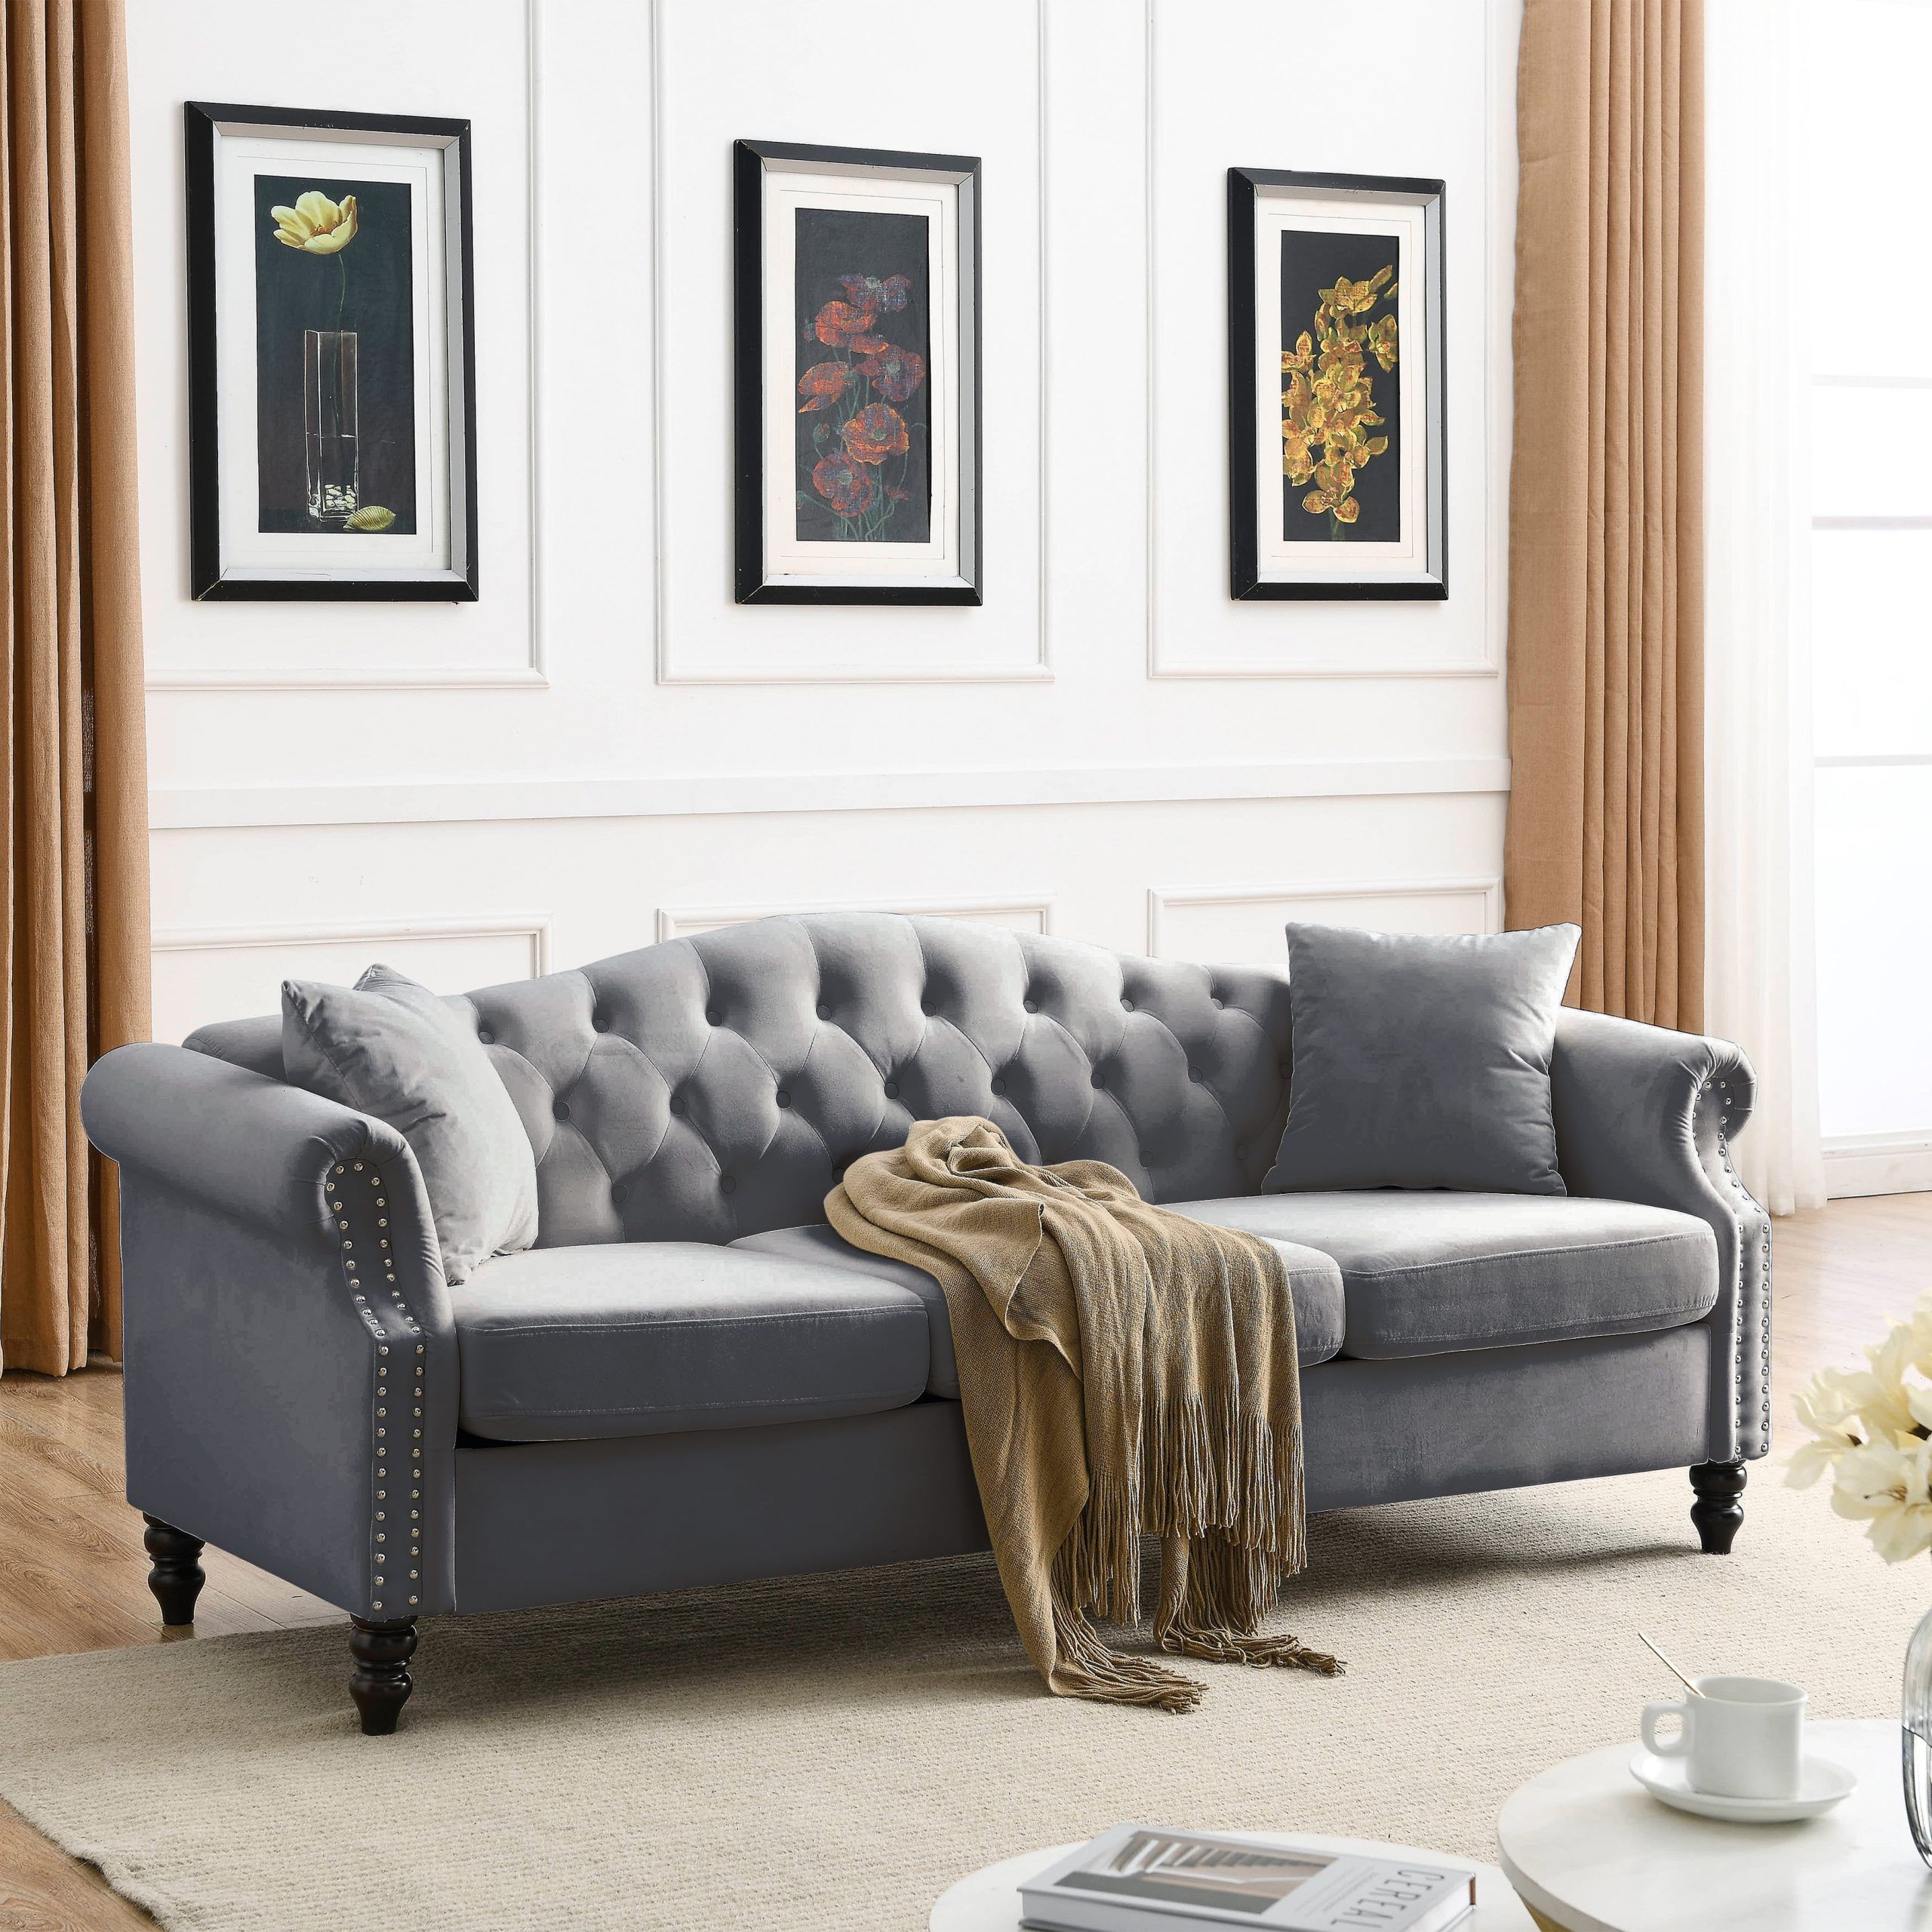 Velvet Couch, 3 Seater Sofa Chesterfield Couch With Rolled Arms And Rivets,  Mid Century Modern Sofa Velvet Tufted Upholstered Love Seats Sofa With Wood  Leg, Comfy Couch Sofas With Two Pillows, Gray A – Pertaining To Modern 3 Seater Sofas (View 7 of 15)